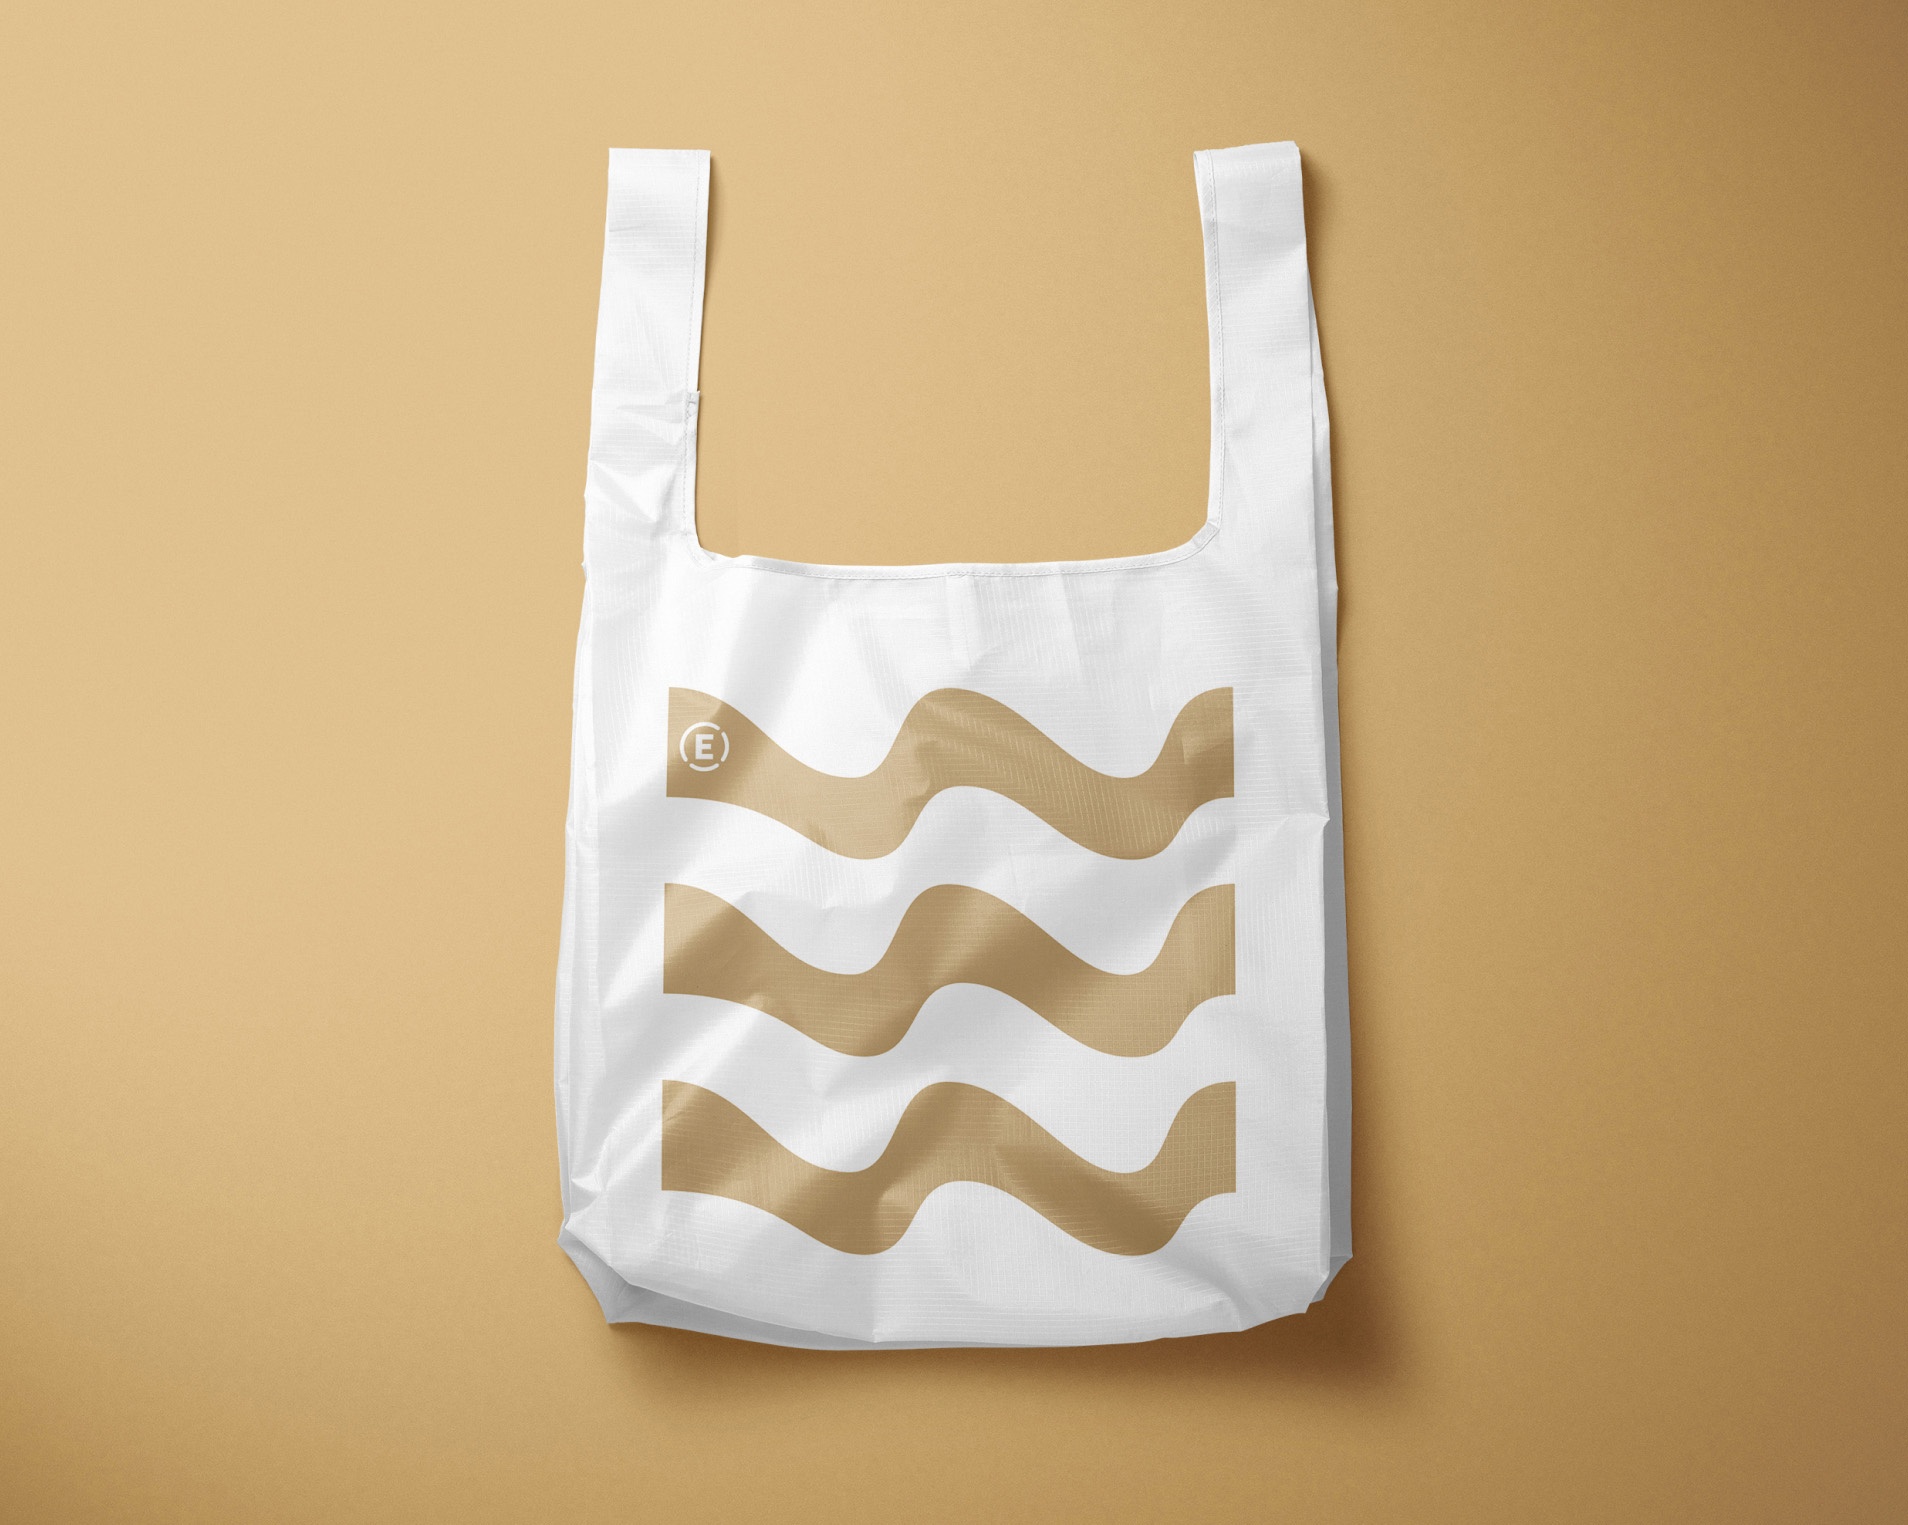 Photo of an Expensicon tote bag